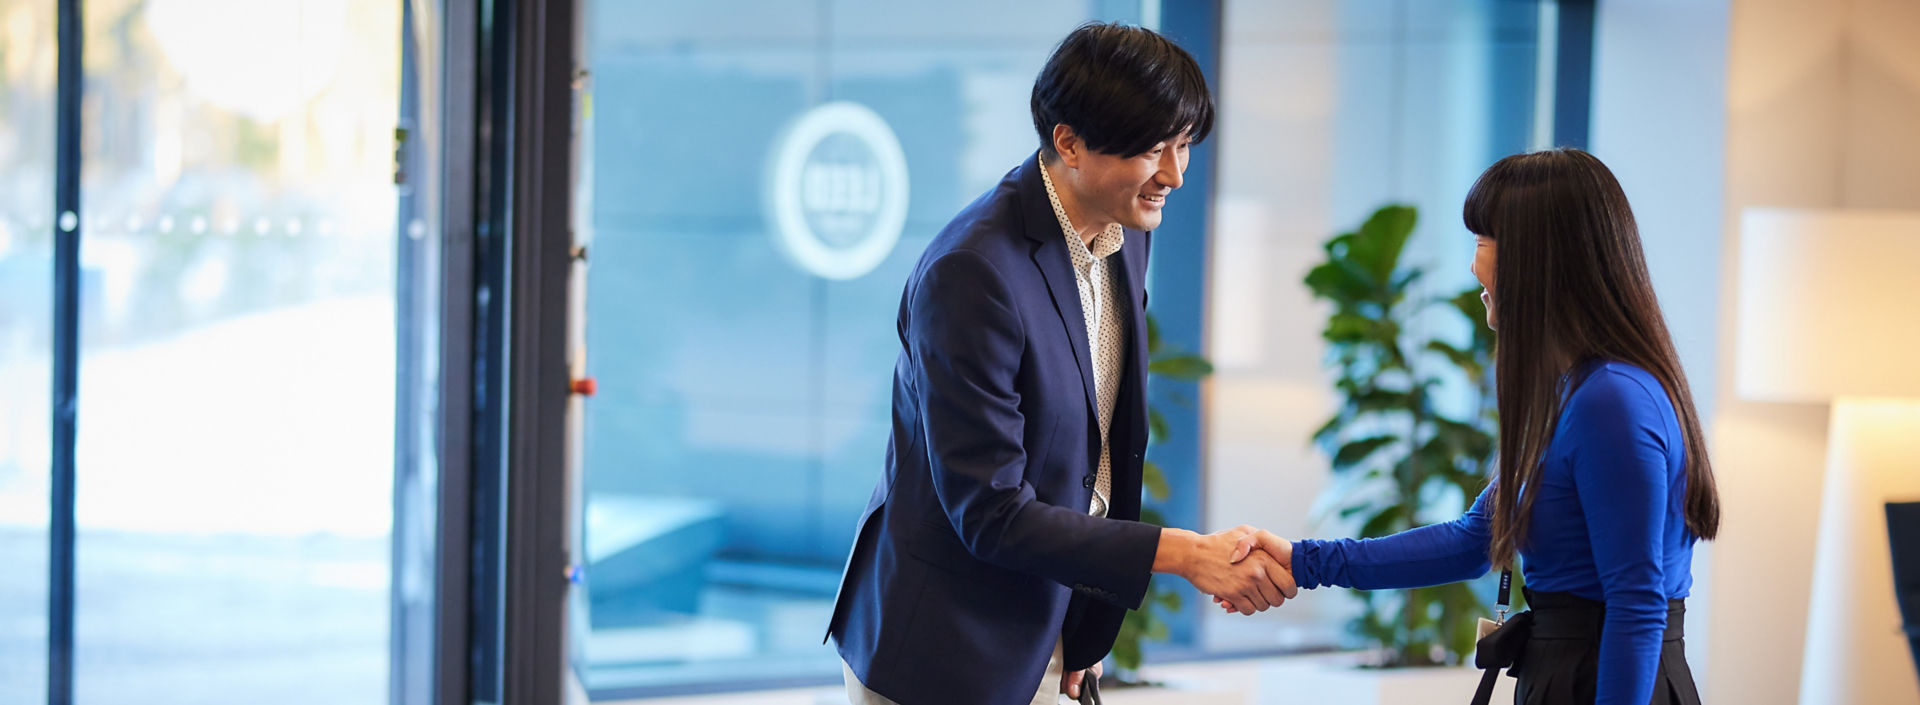 Two people shaking hands in lobby before business meeting.